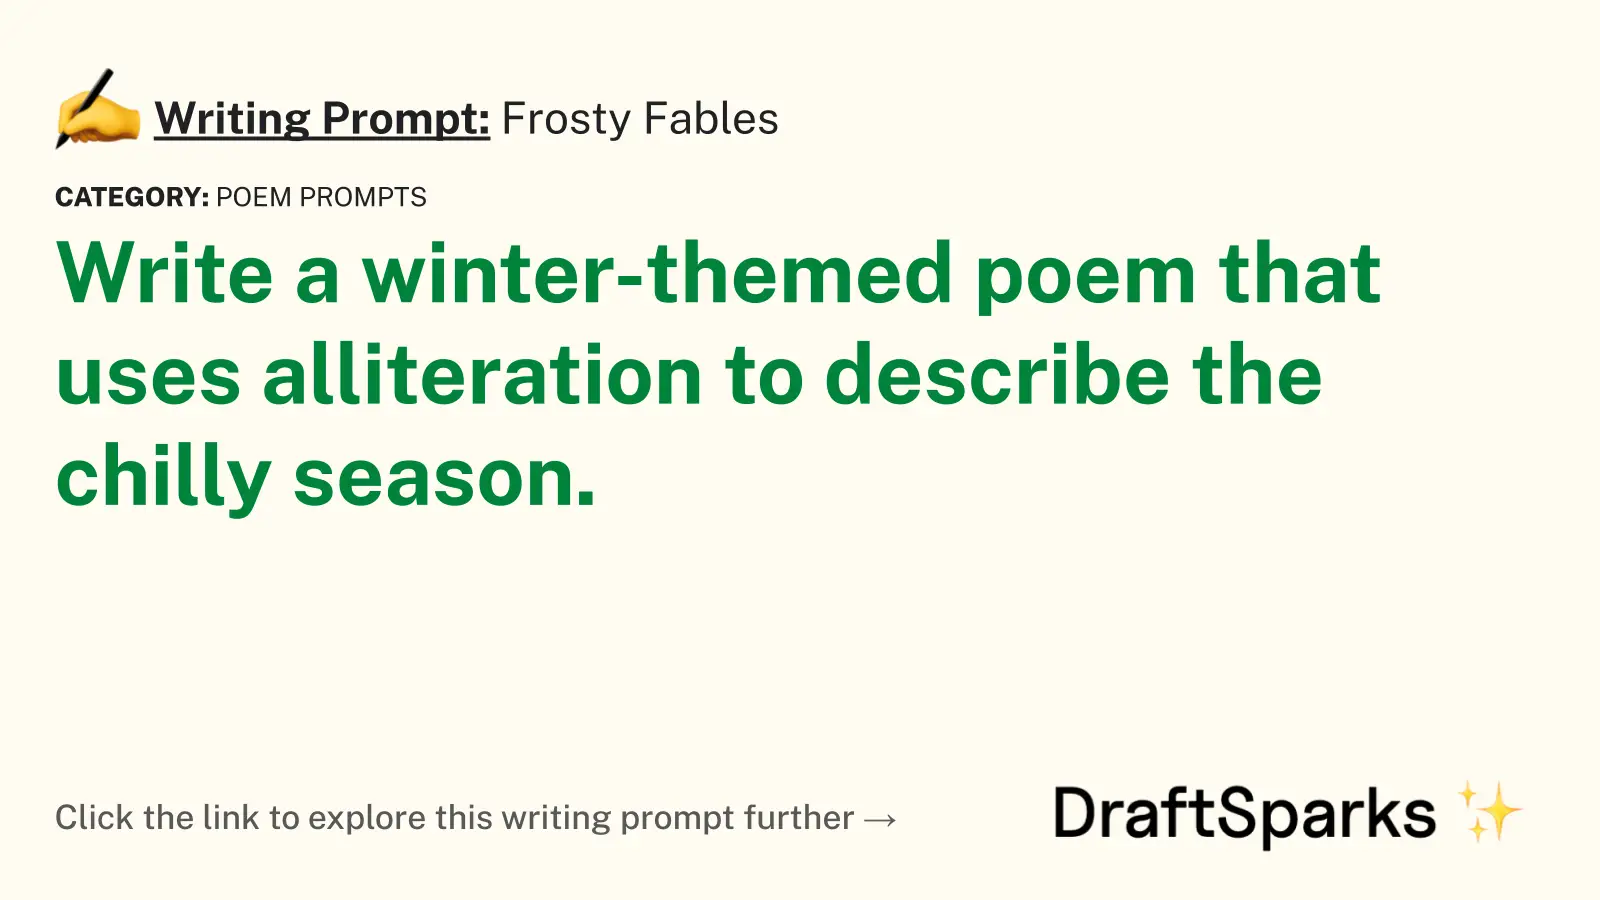 Frosty Fables